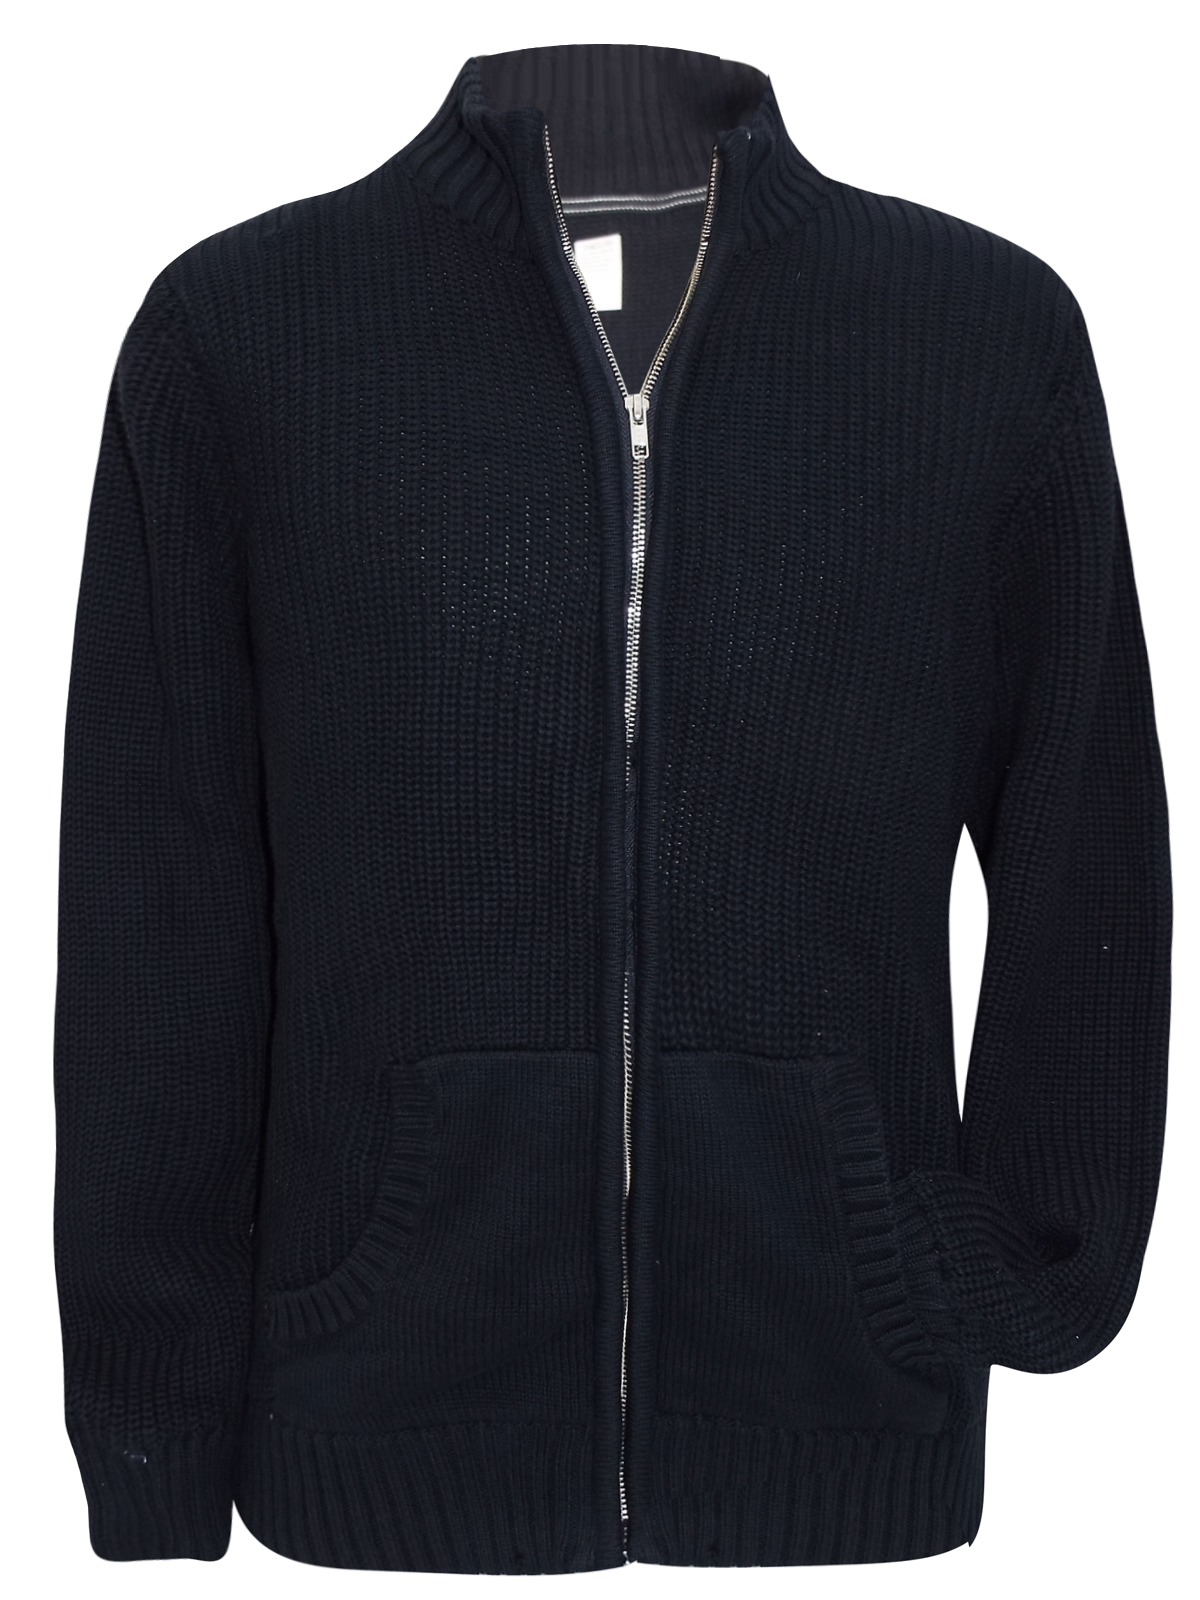 F&F - - F&F NAVY Zip Through Knitted Cardigan - Size Small to XXXLarge